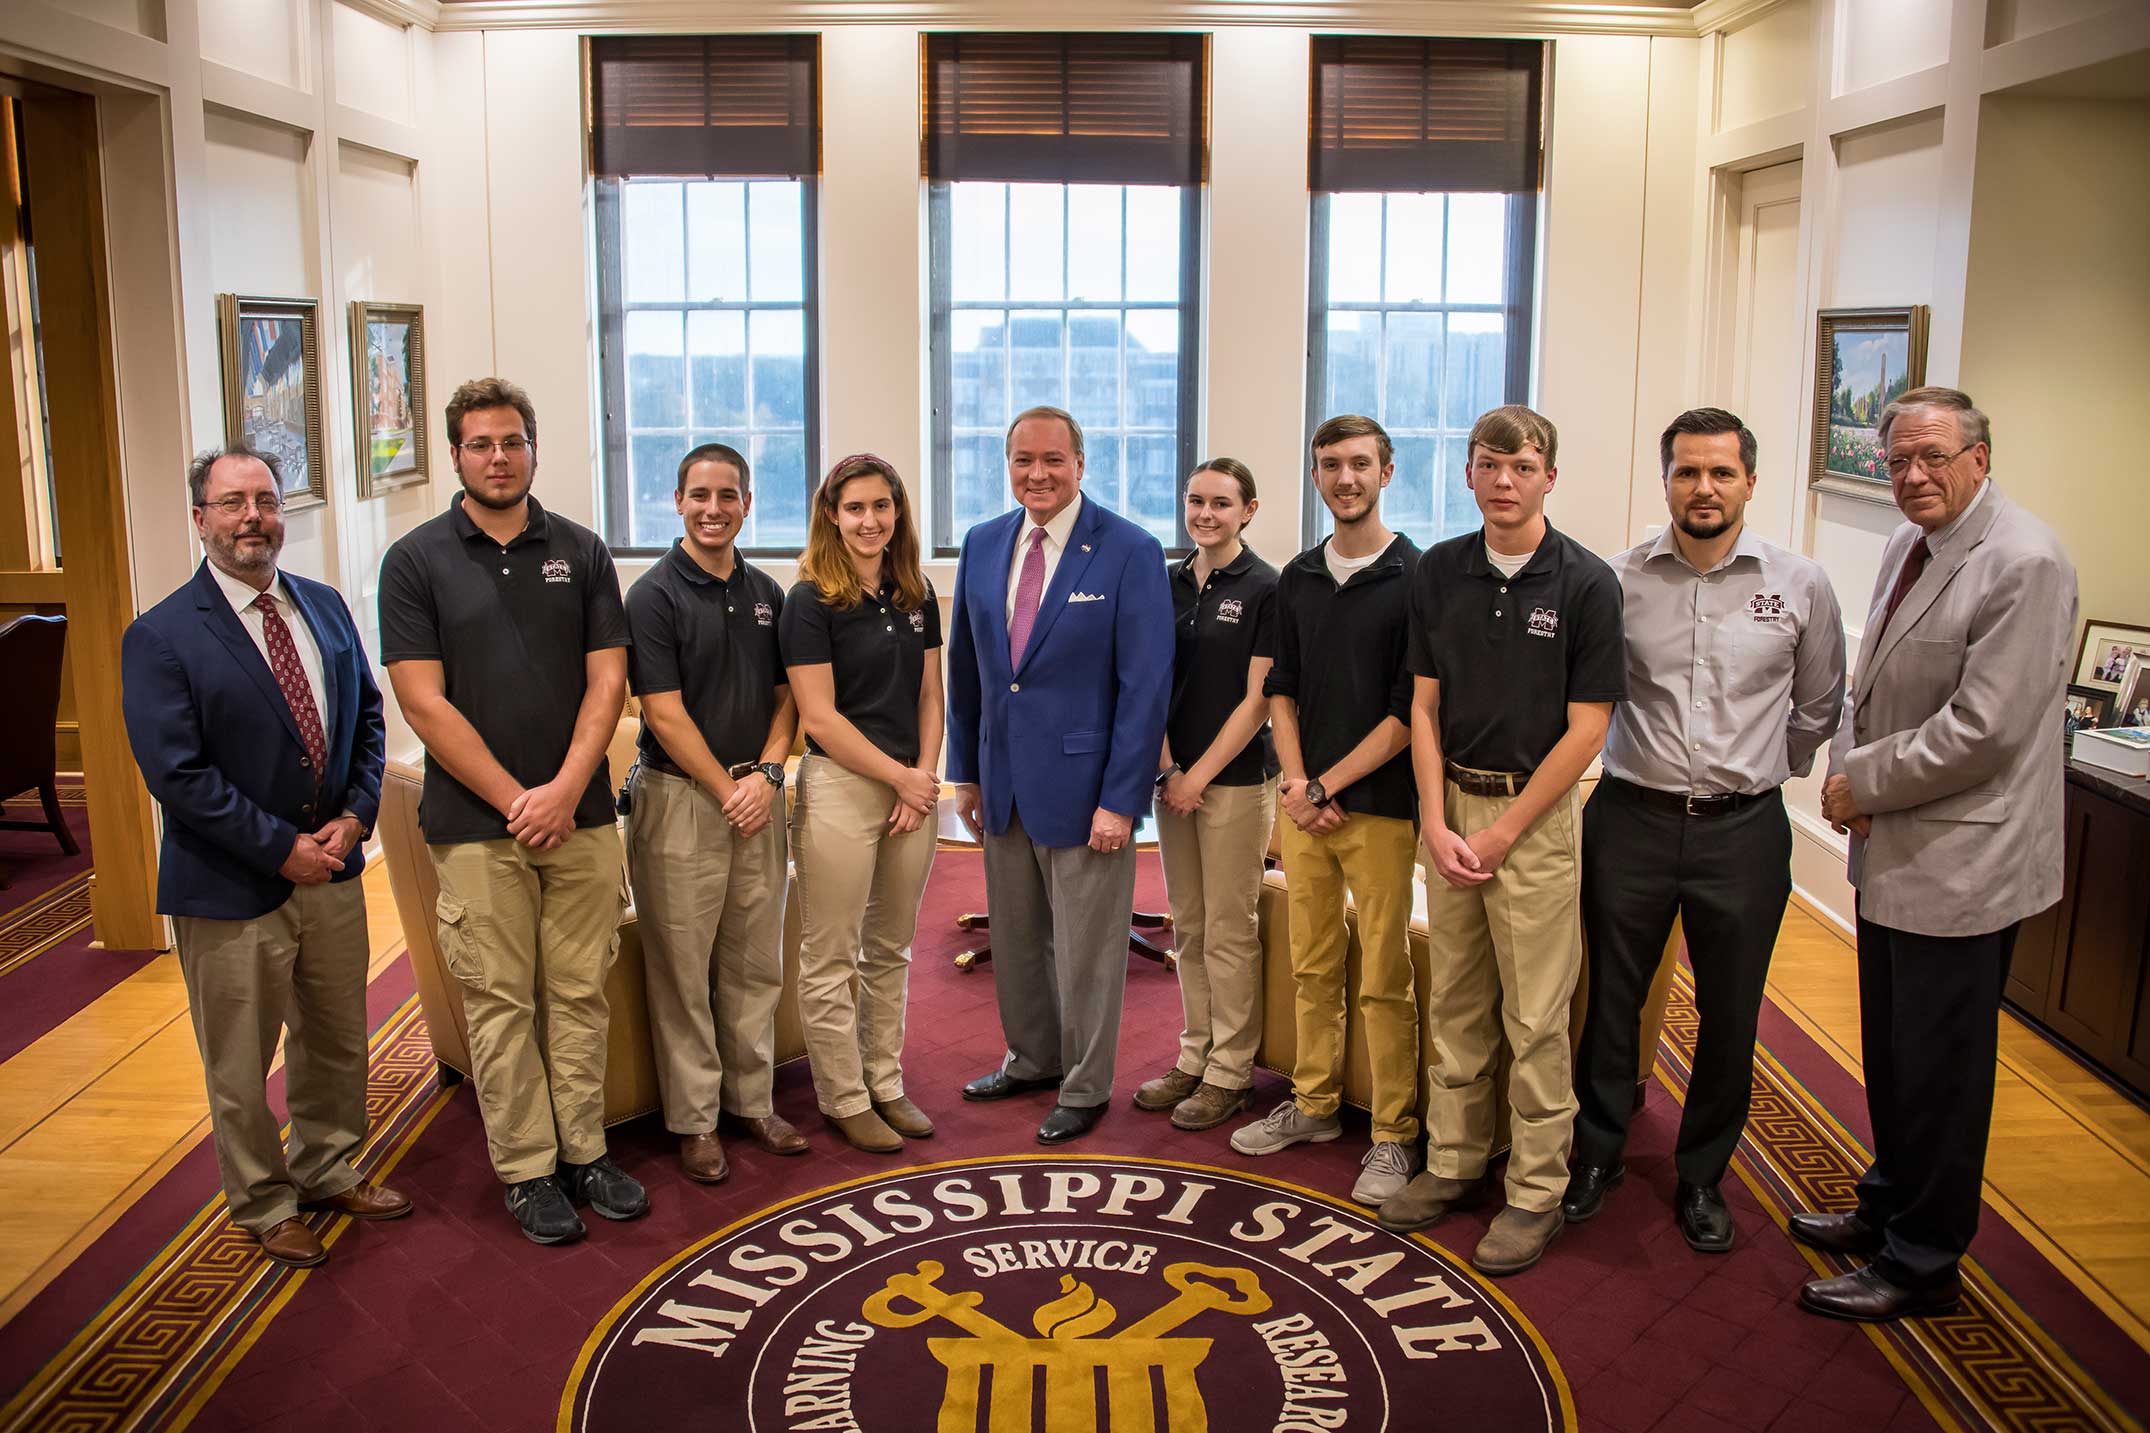 Six forestry students and four men stand on carpet with the MSU displayed.